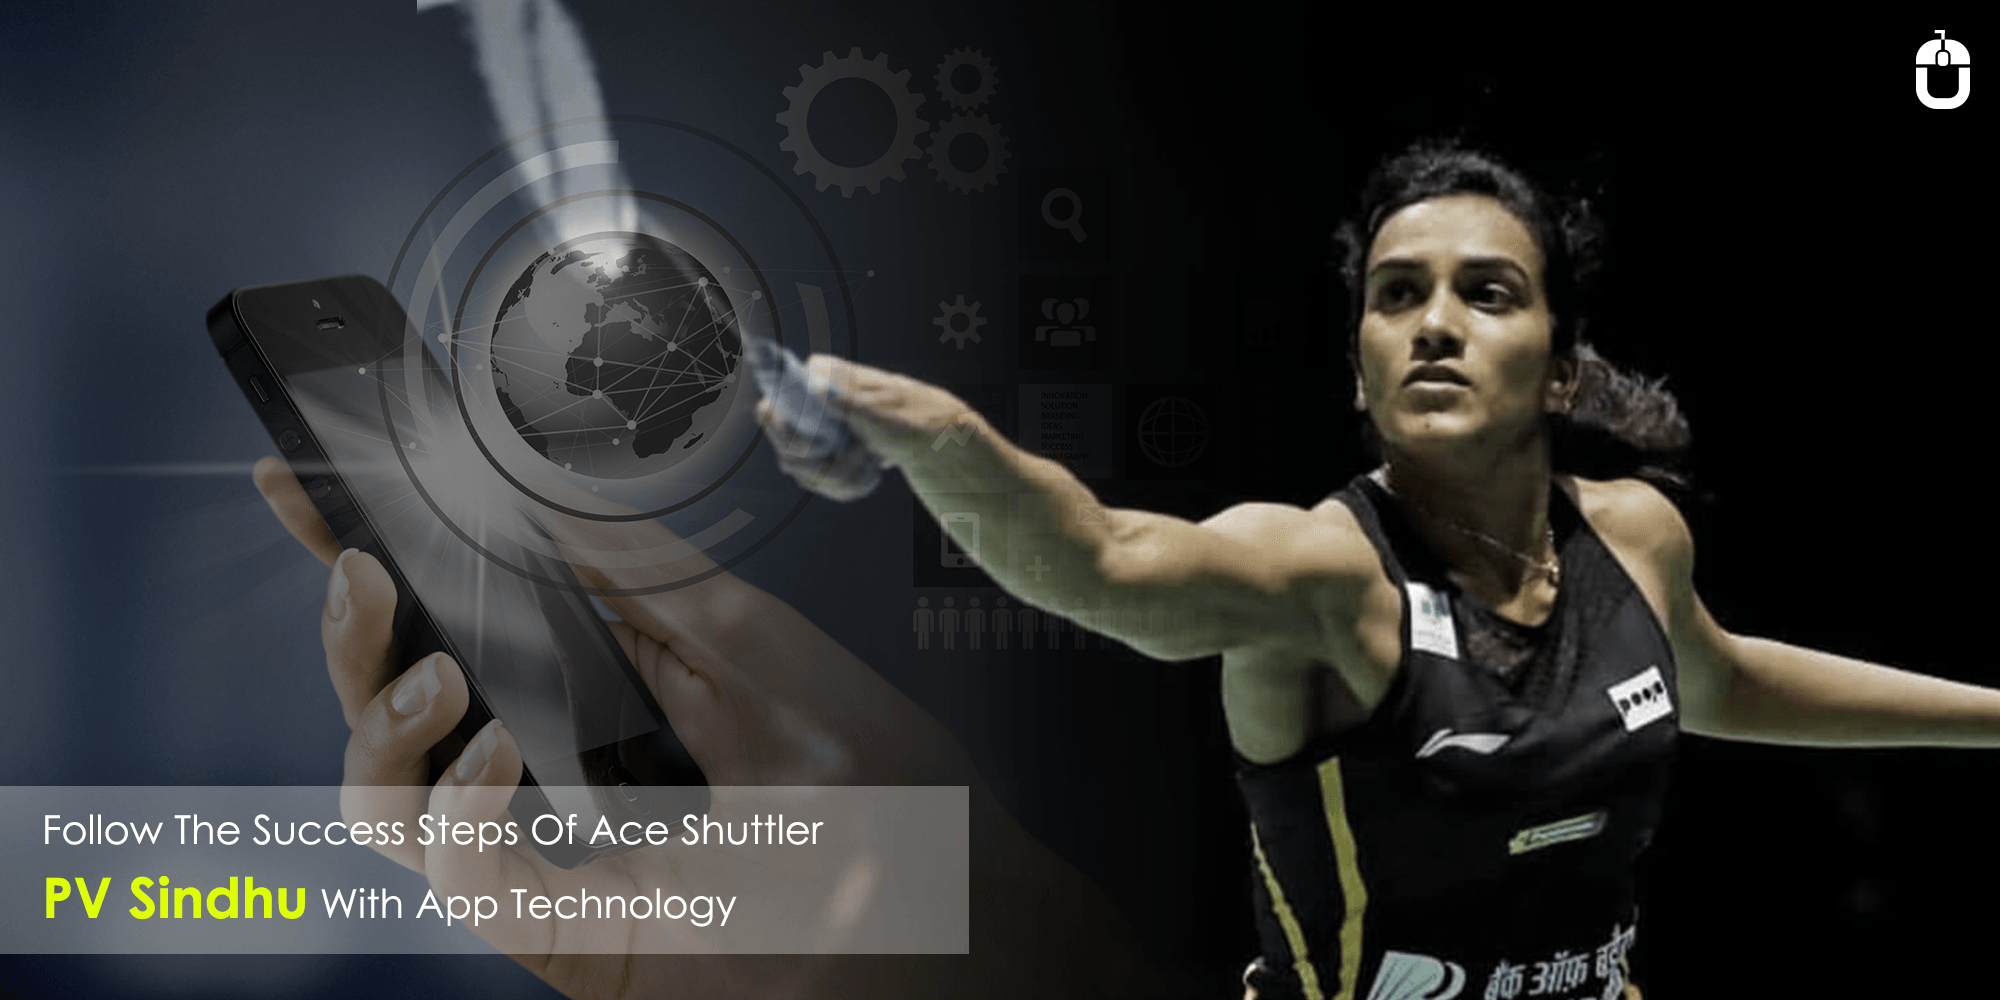 Follow The Success Steps Of Ace Shuttler PV Sindhu With App Technology